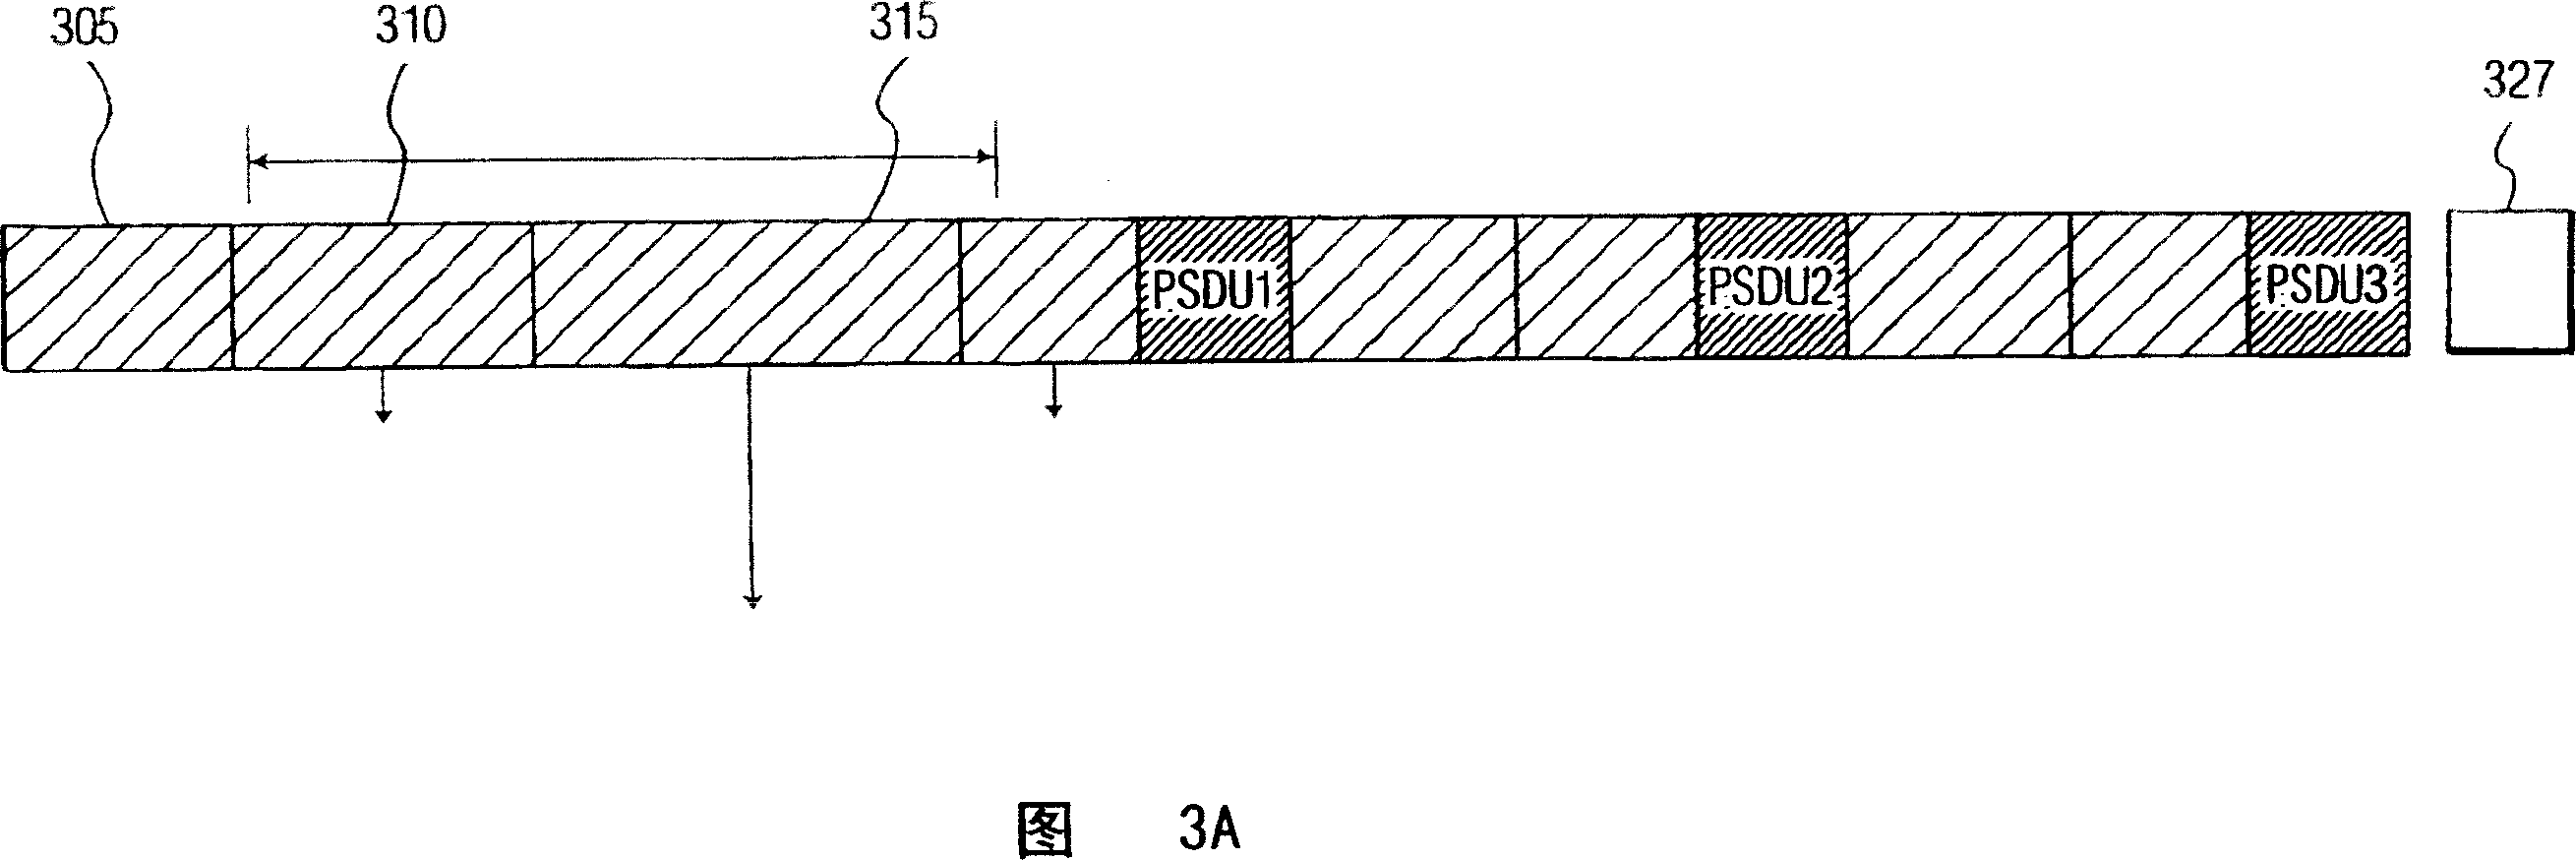 Superframe protocol packet data unit format having multirate packet aggregation for wireless systems